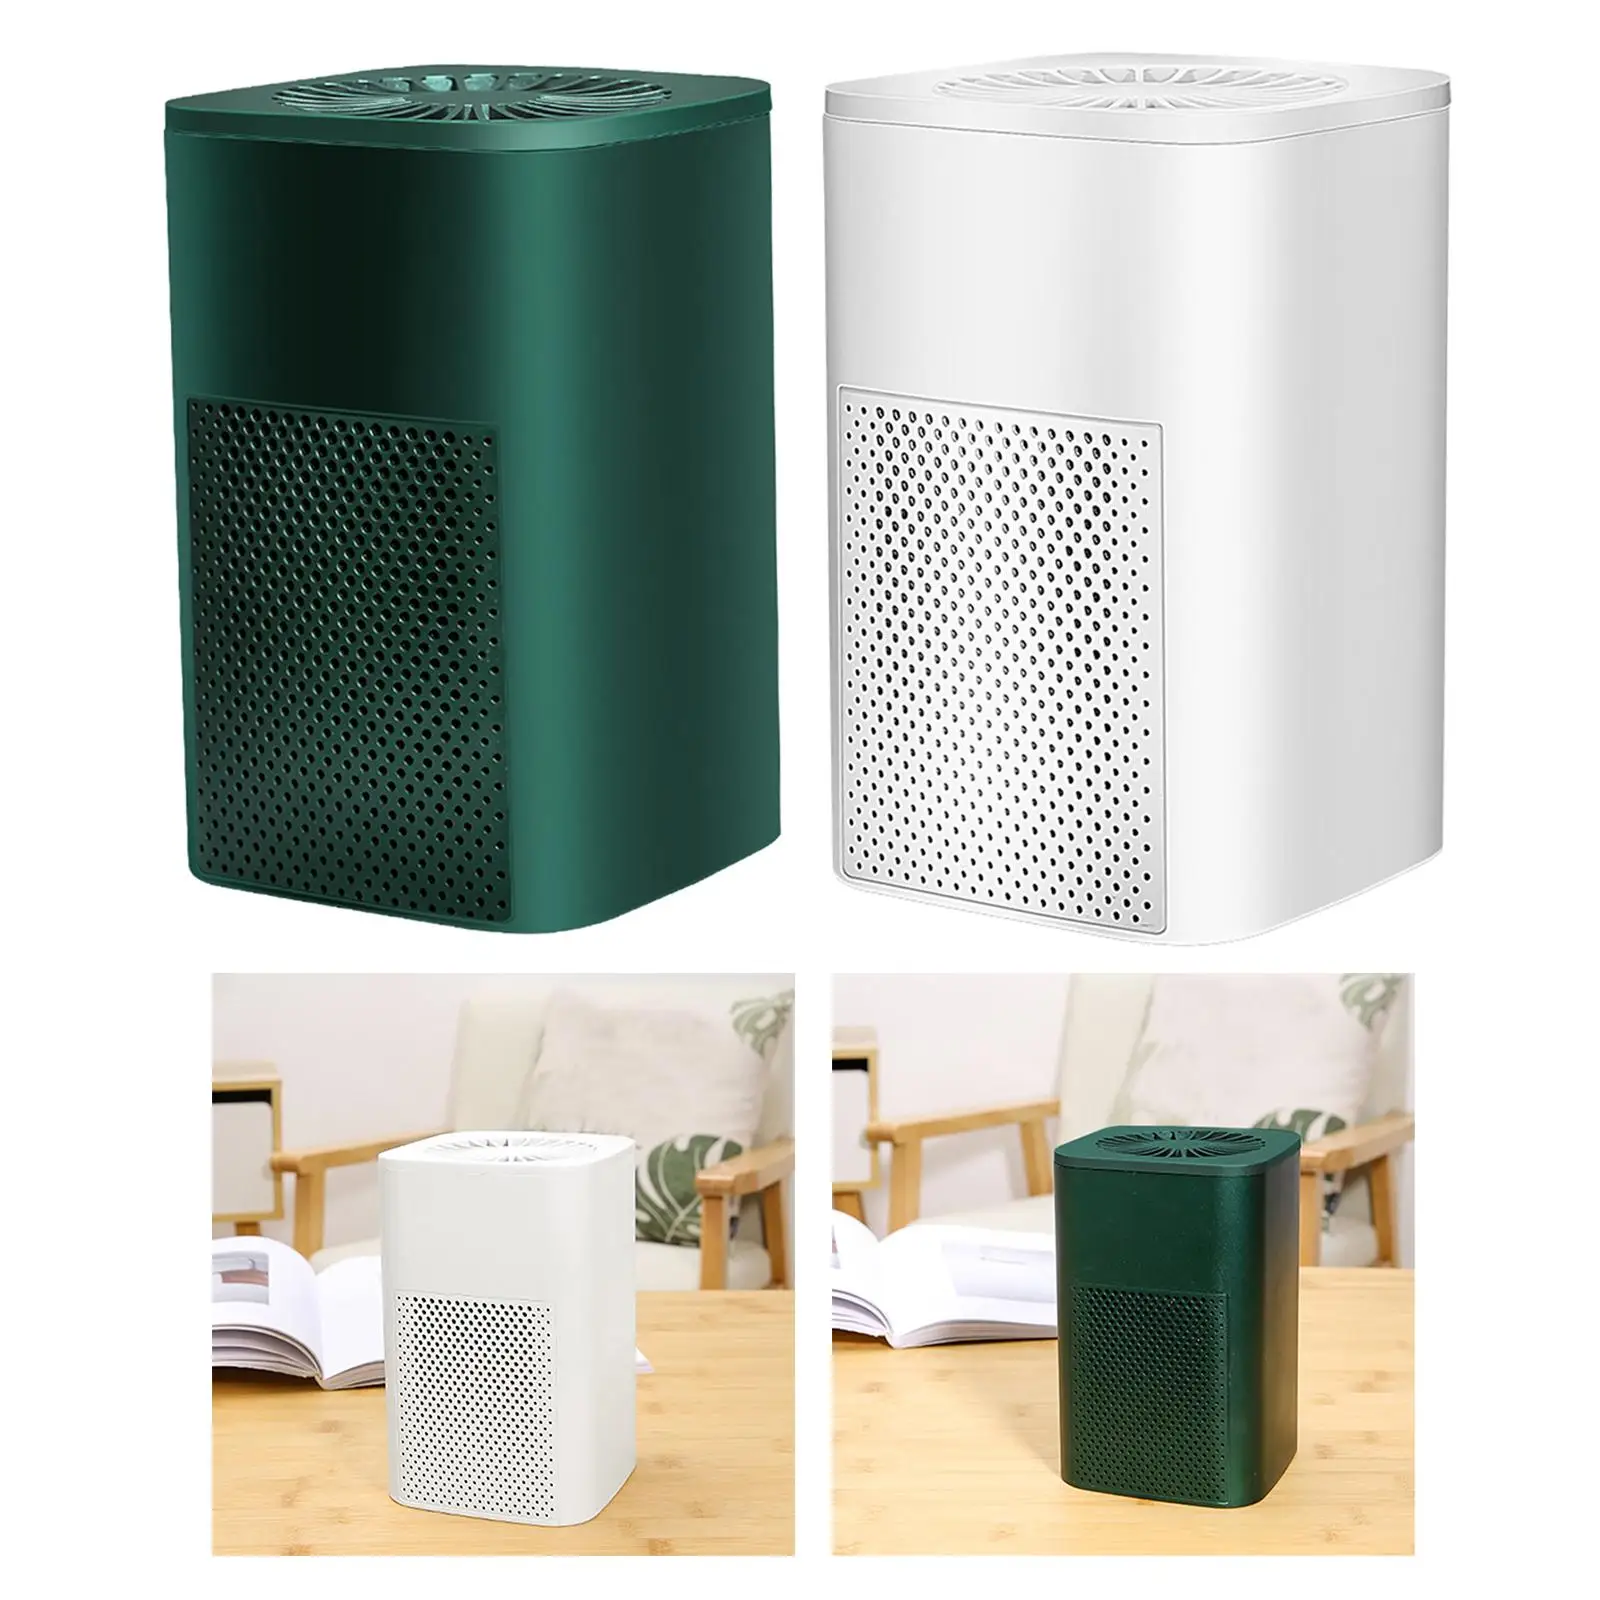 Mini Air Purifier 2 Layer Activated Carbon Travel USB Powered Home Office 35dB Car Air Cleaner Removes CO2 Pollen Germs Smoke